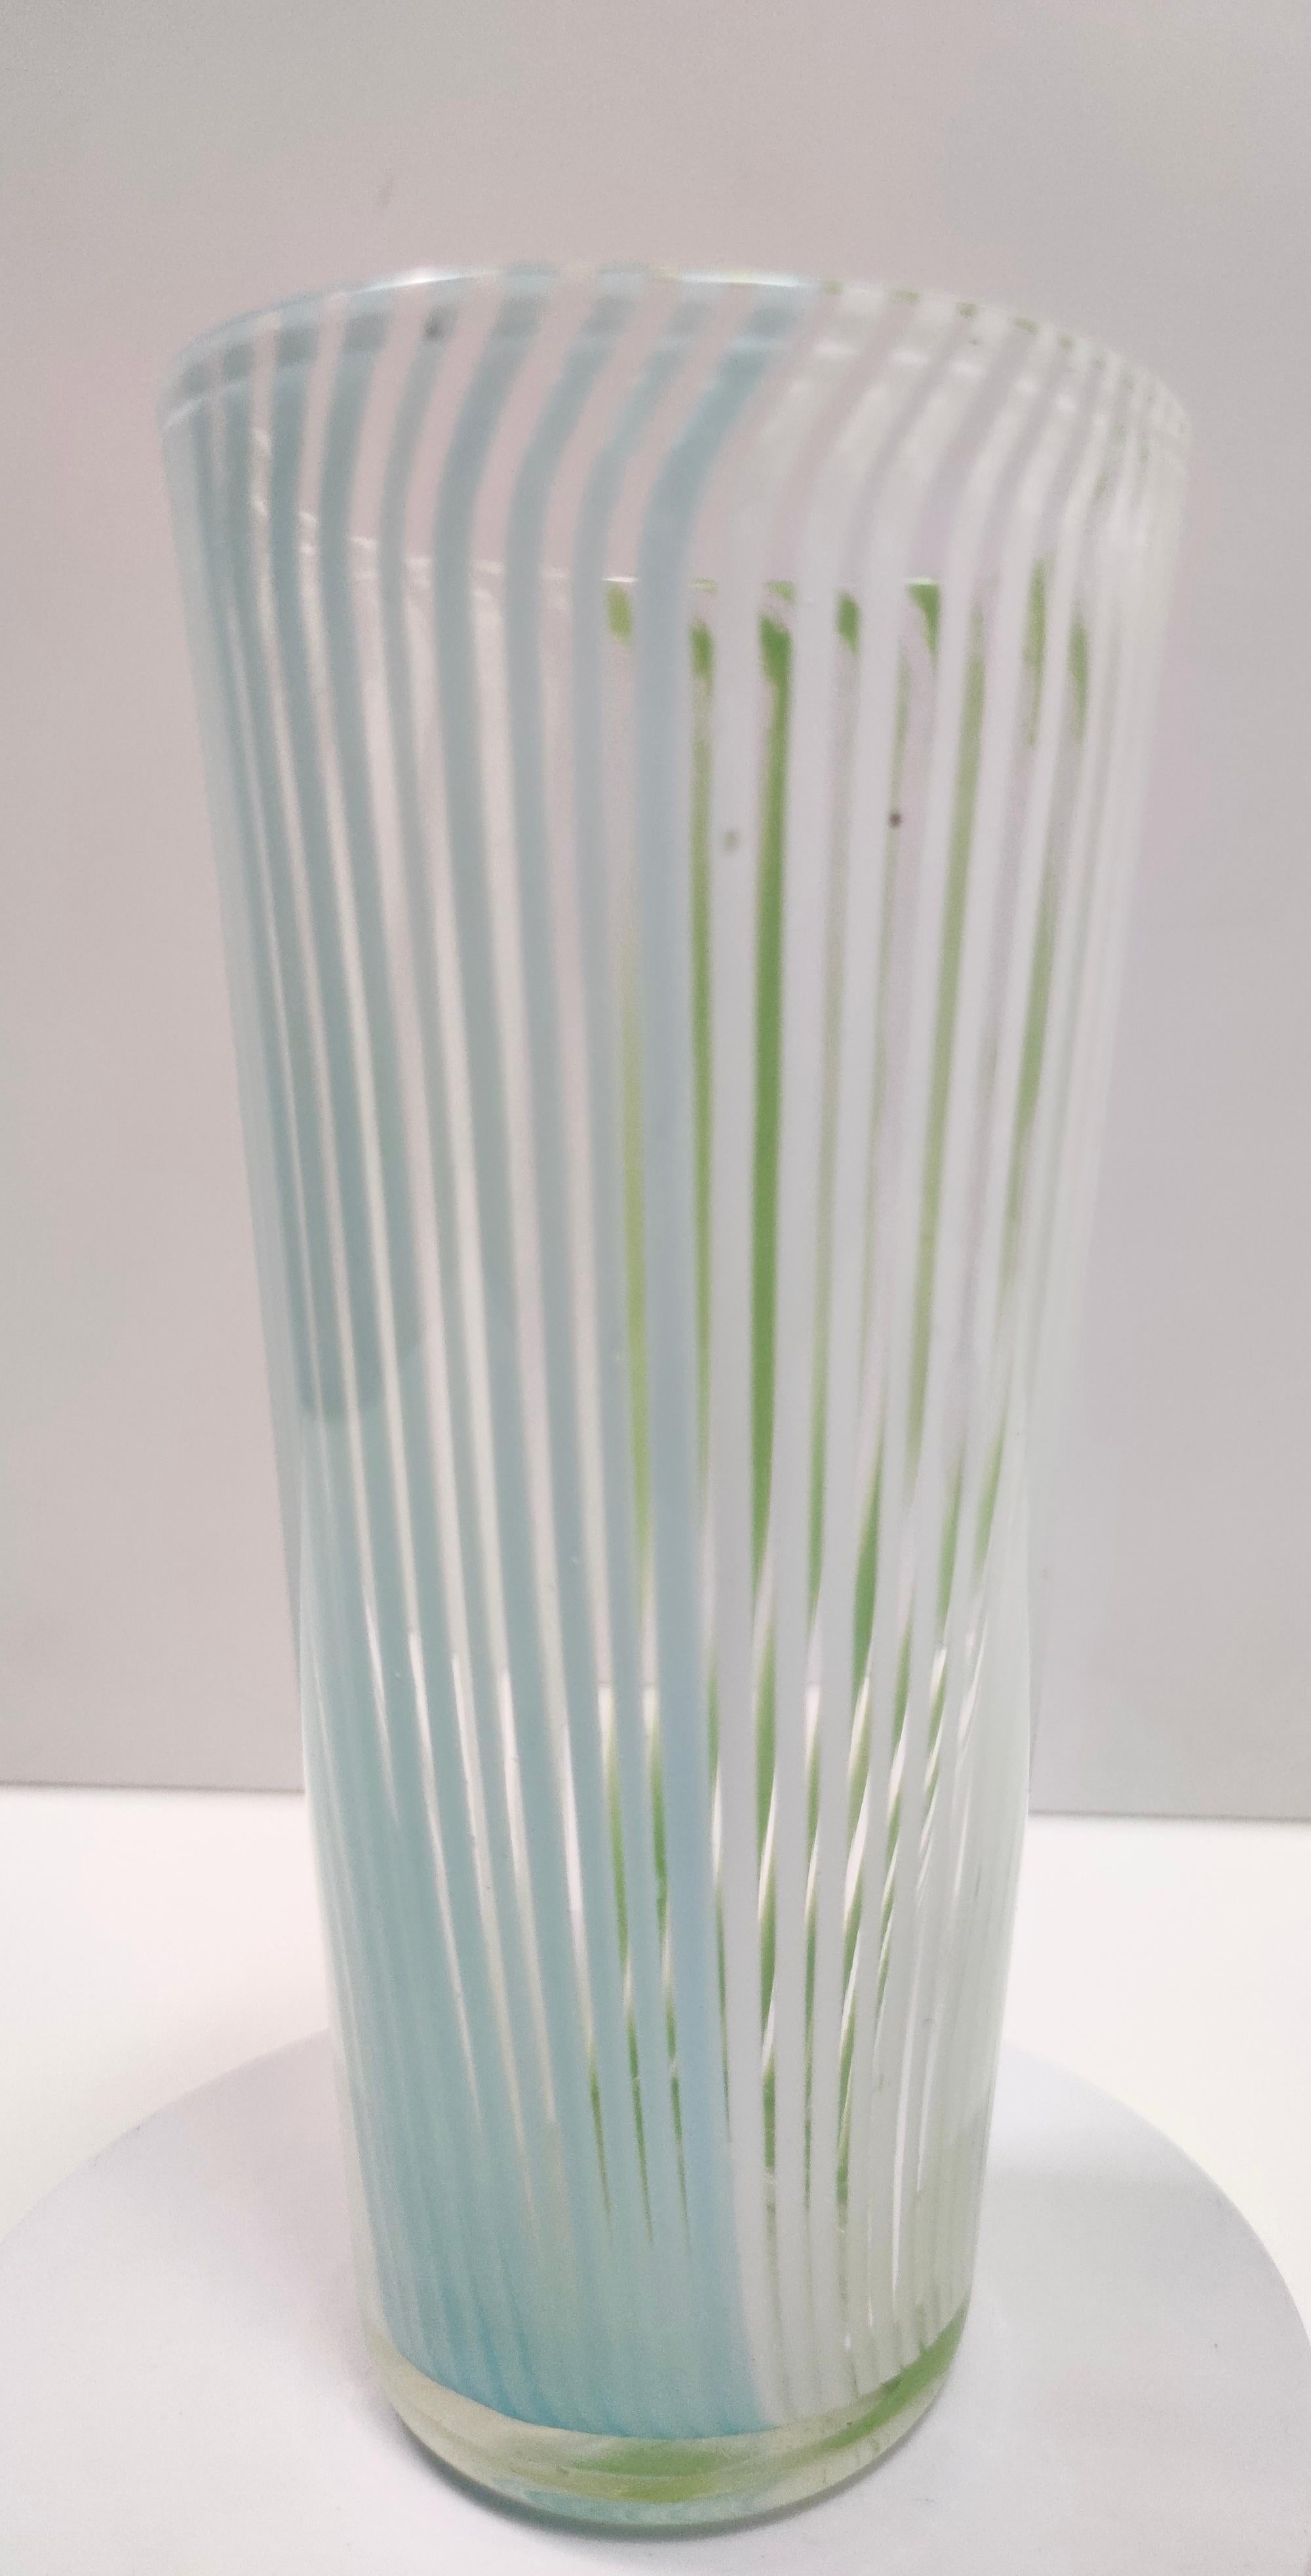 Vintage Green, White and Light Blue Murano Glass Vase by Dino Martens In Excellent Condition For Sale In Bresso, Lombardy